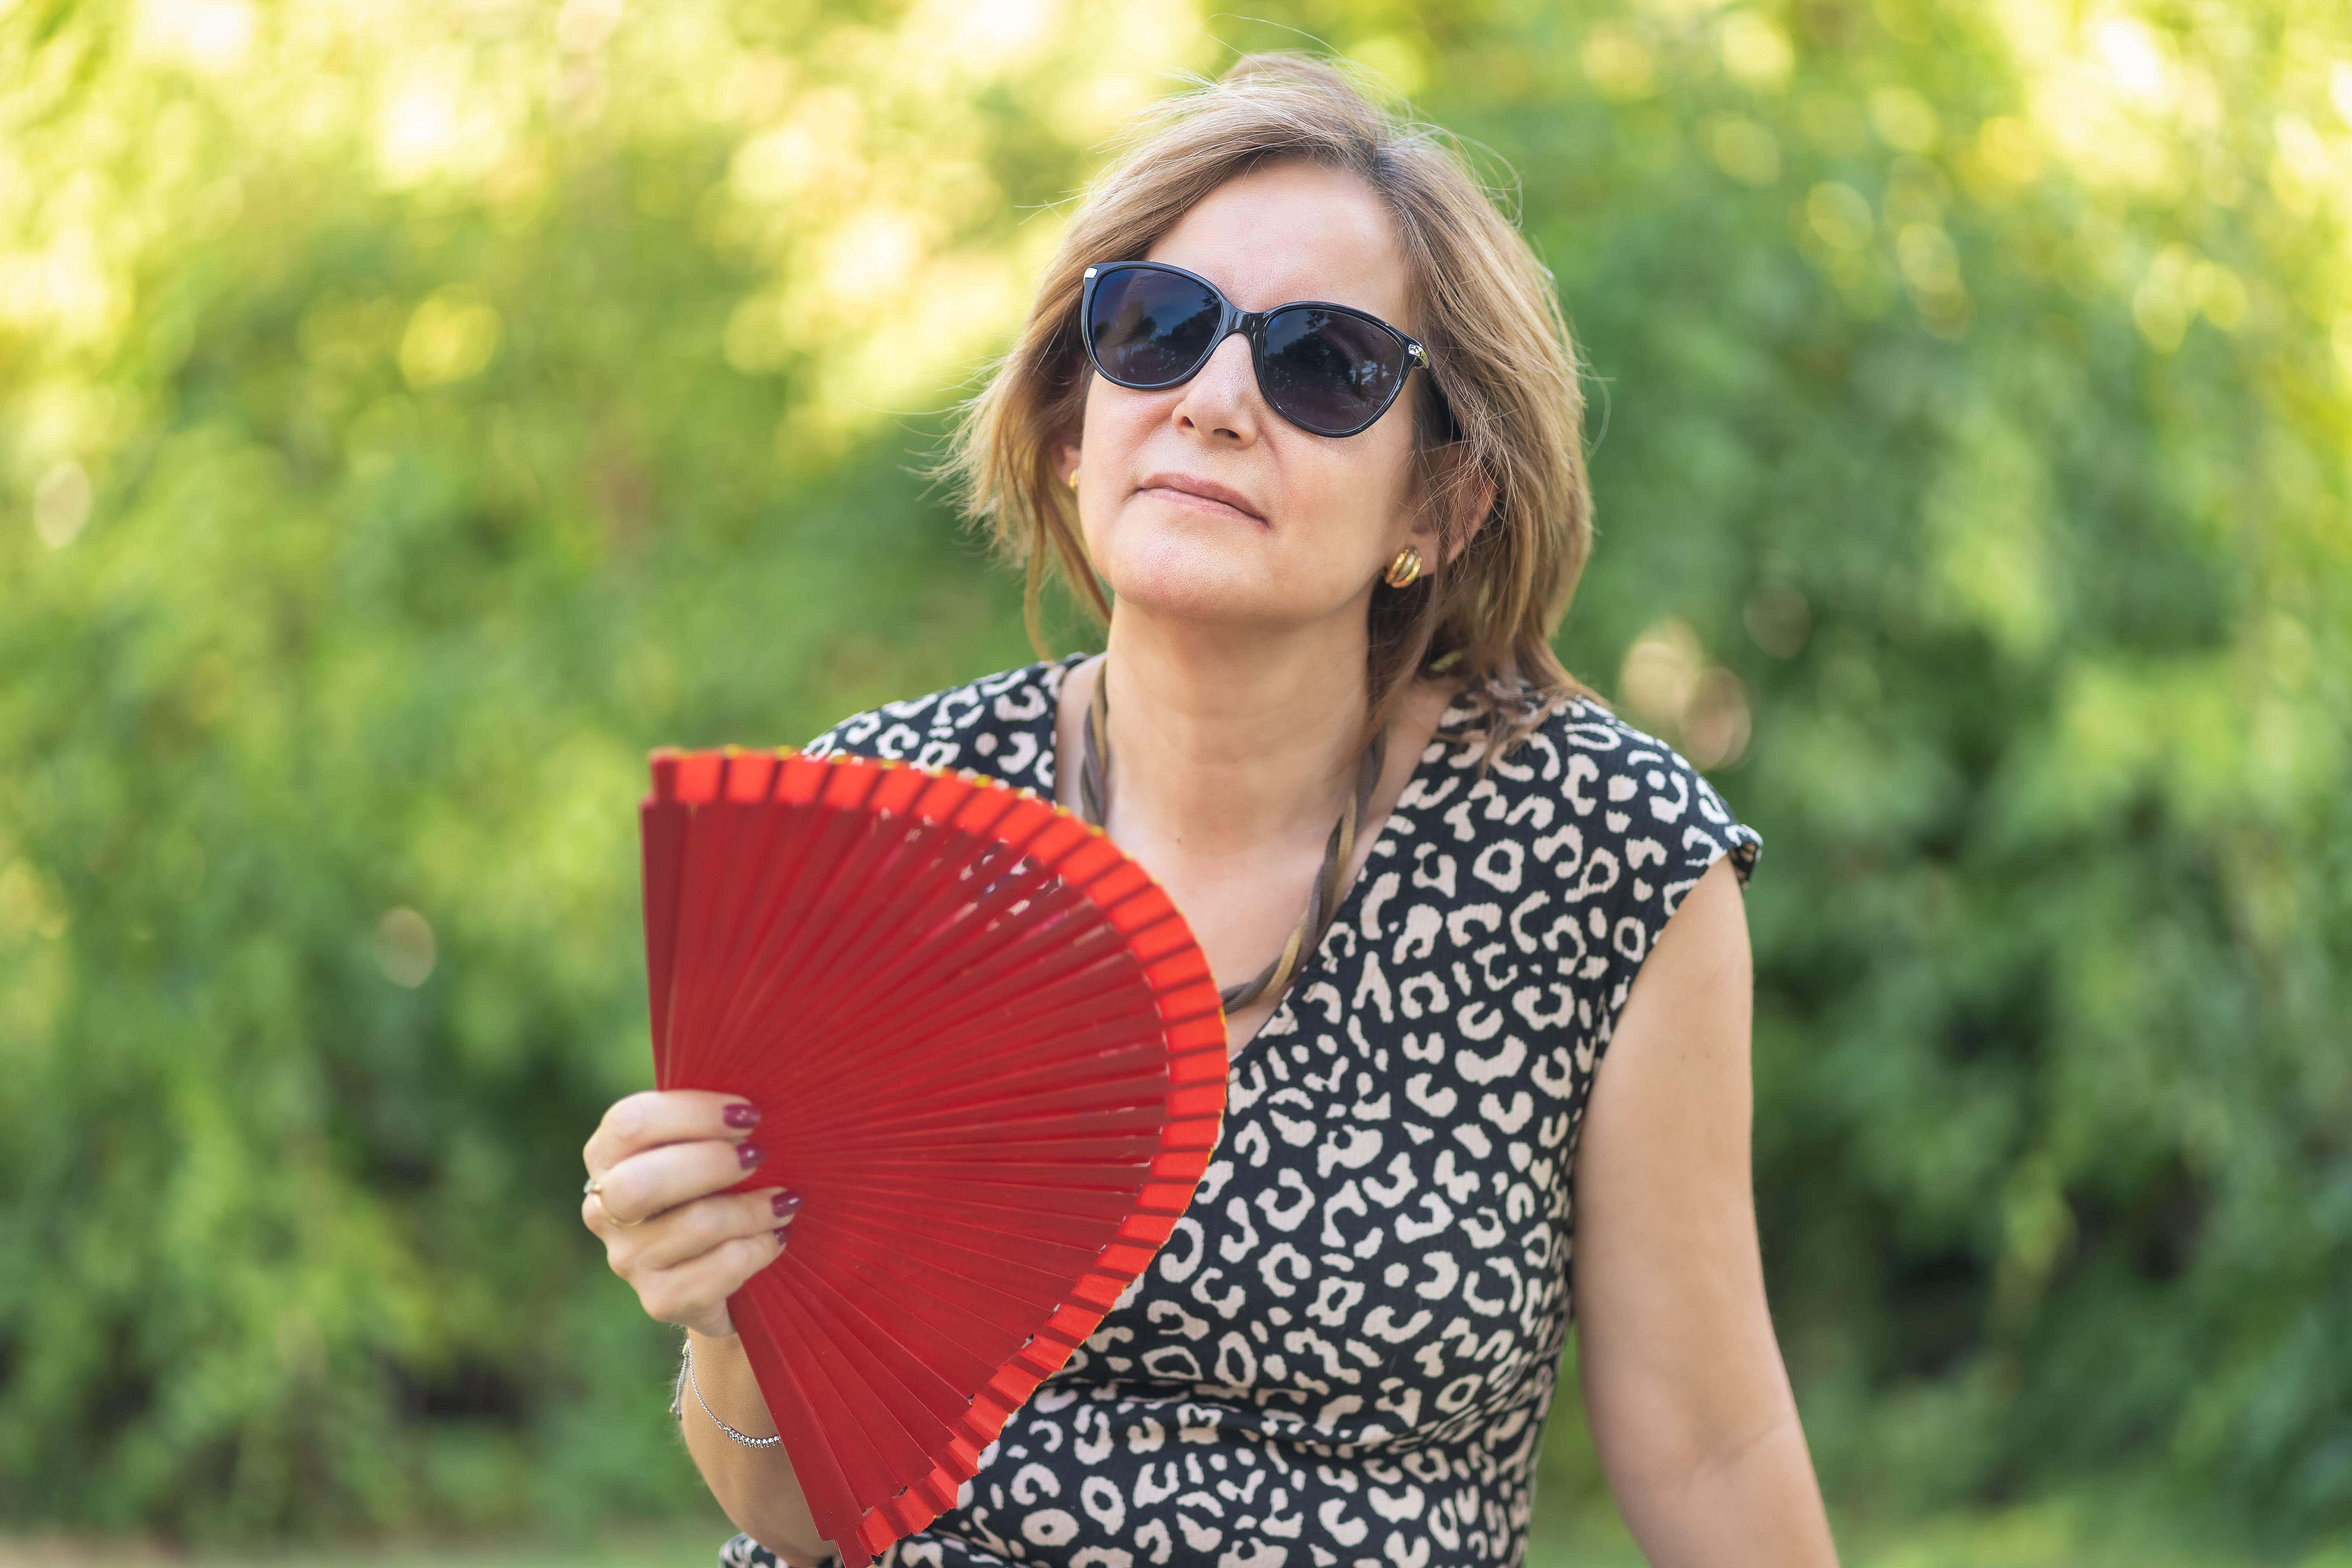 Sunny Sleeping Xxx - Struggling with menopause symptoms in the heat? An expert shares tips | The  Independent